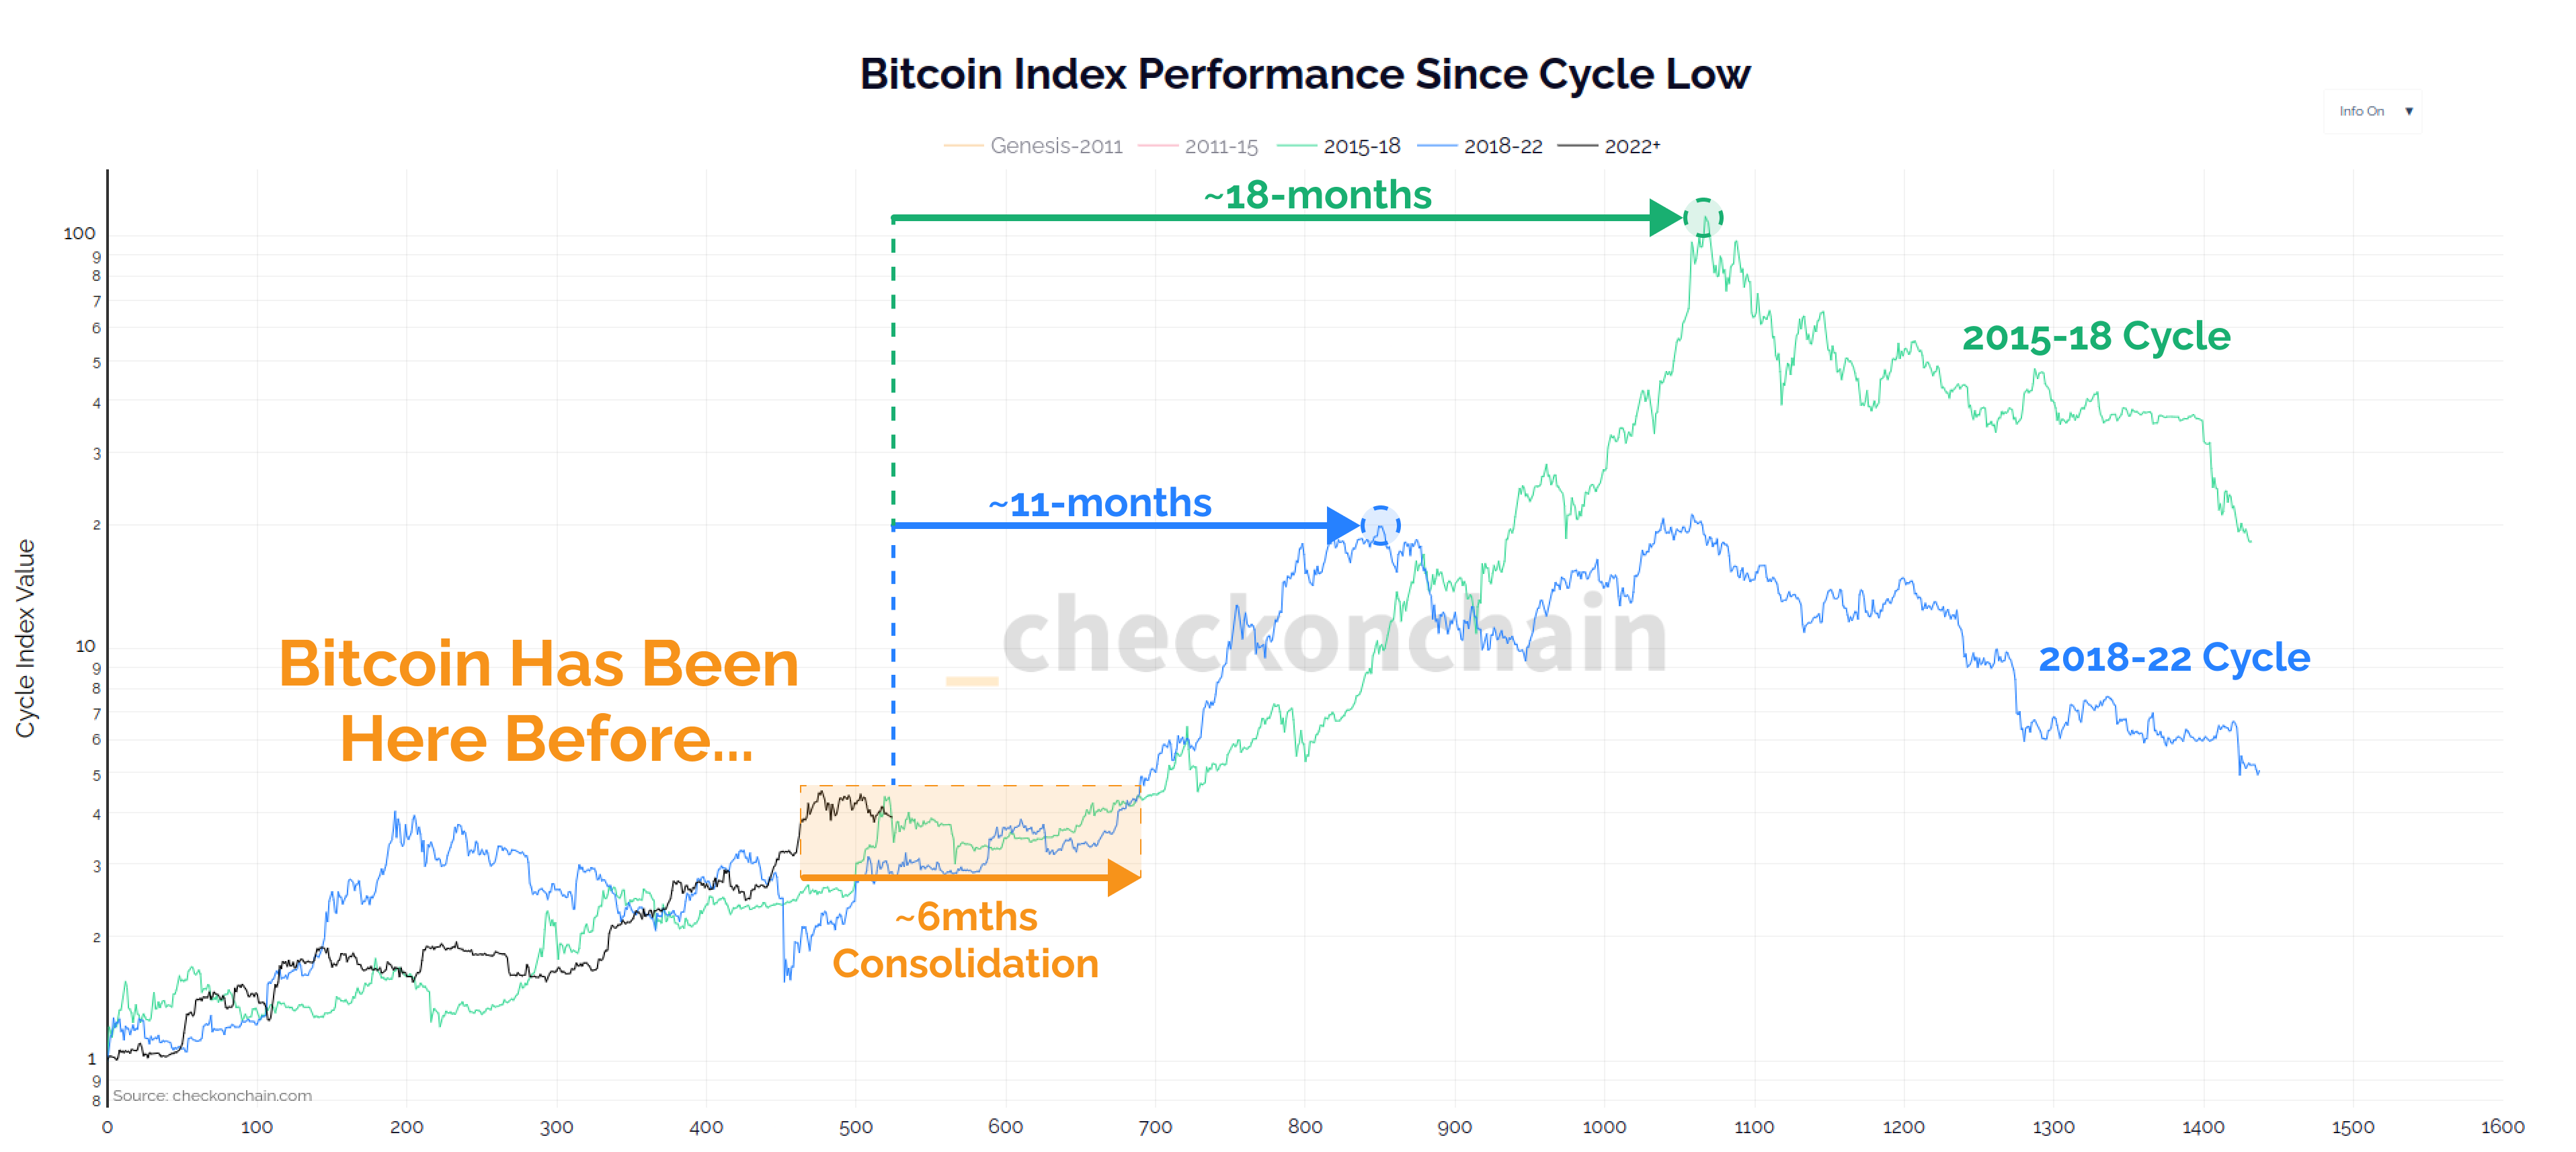 Bitcoin Index Performance Since Cycle Low